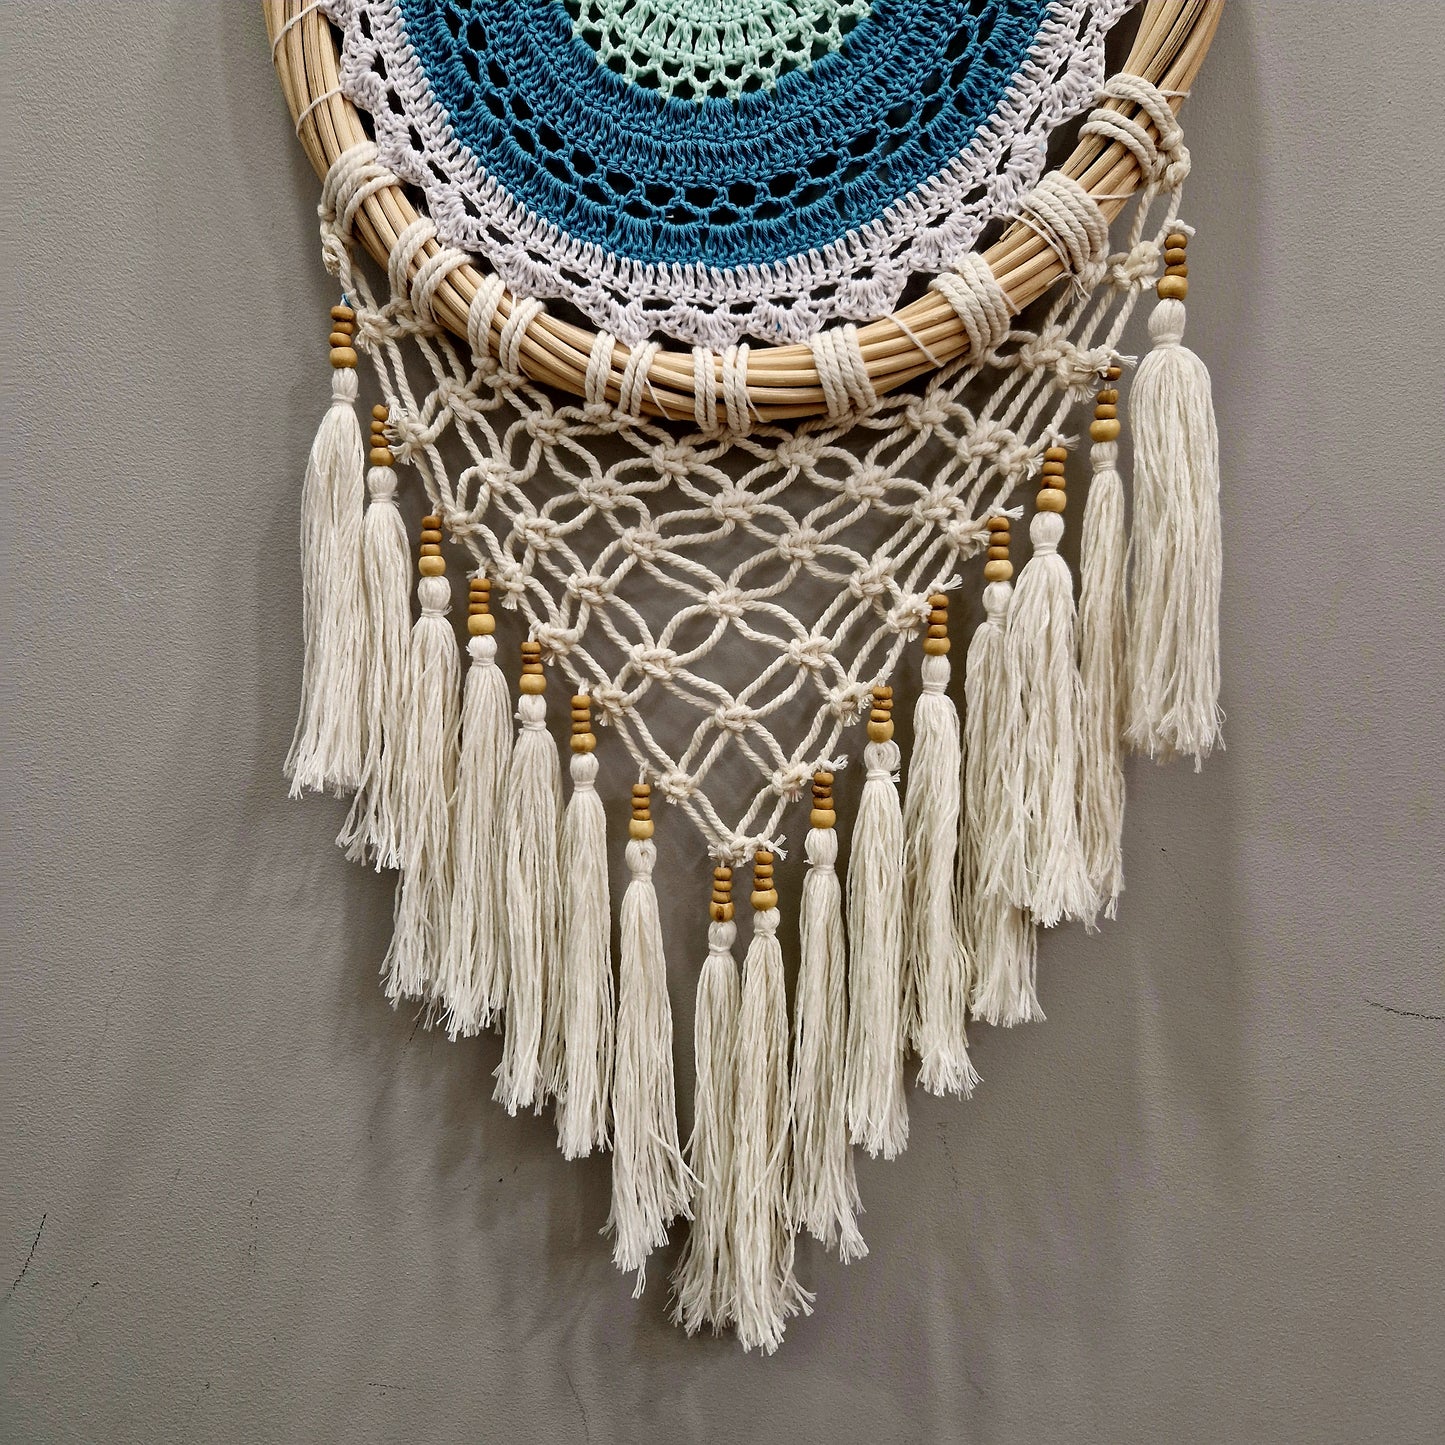 32 cm dream catcher with wooden beads